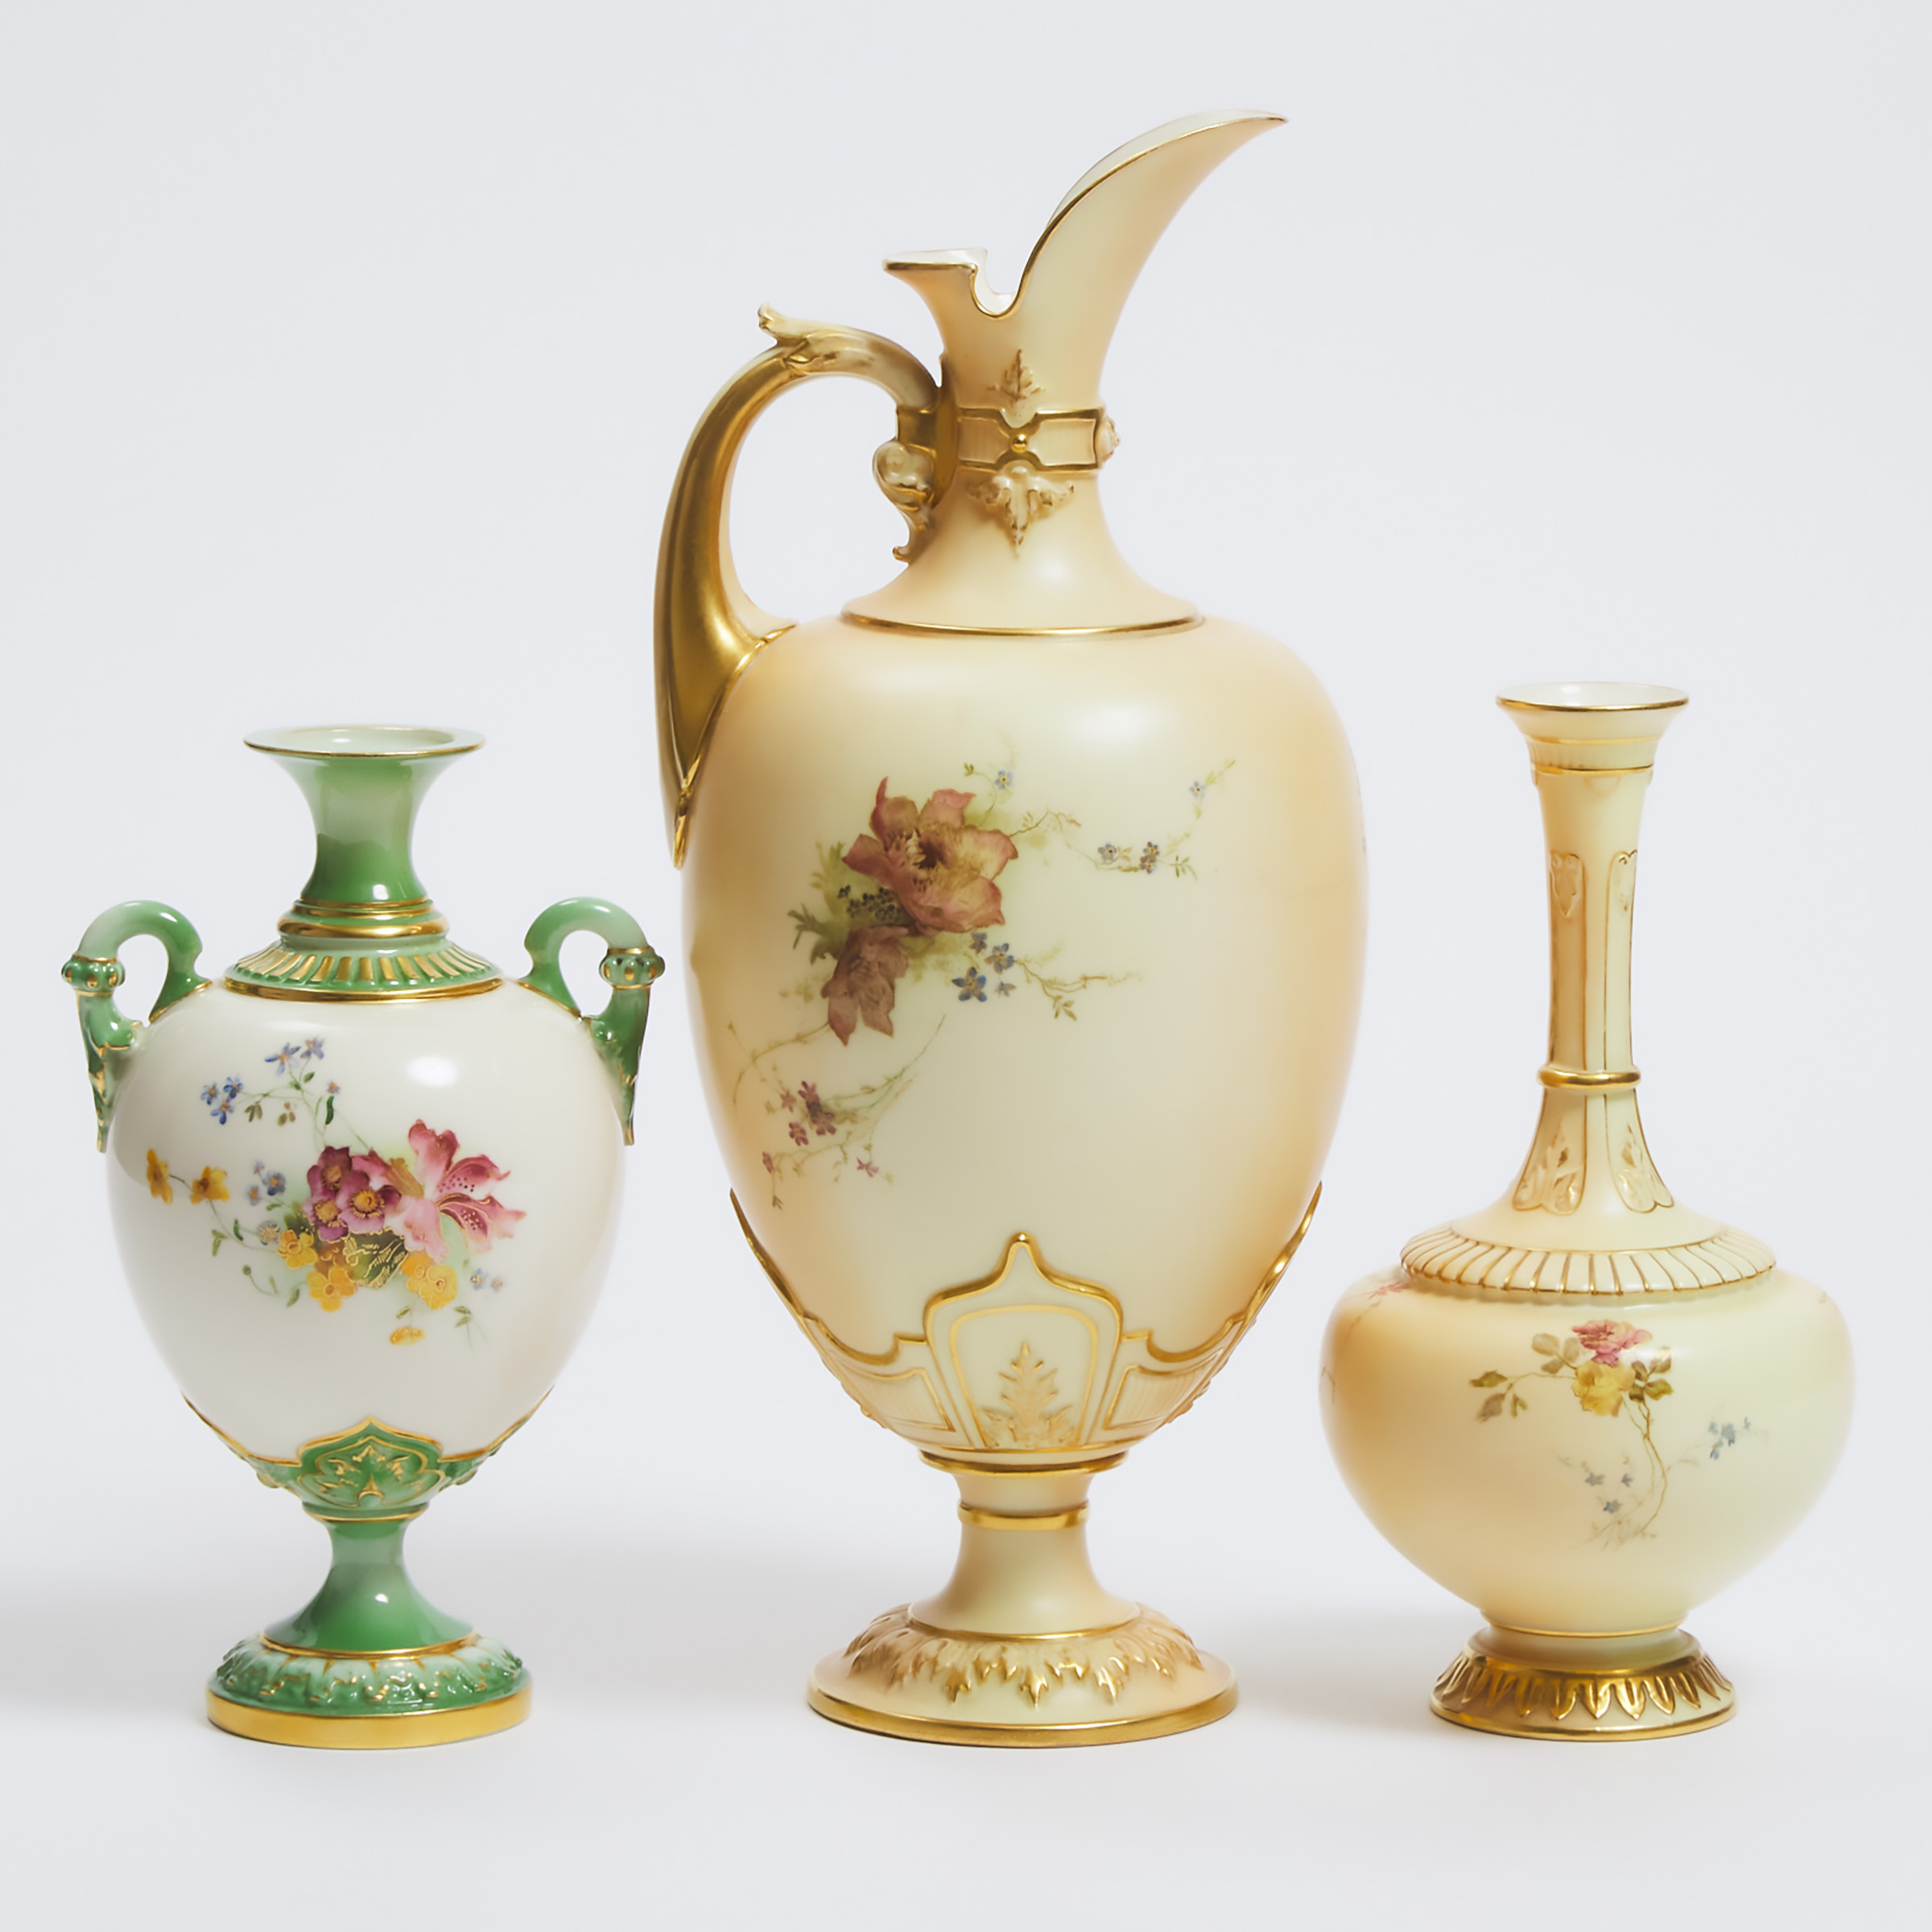 Royal Worcester Ewer and Two Vases, c.1894/1905